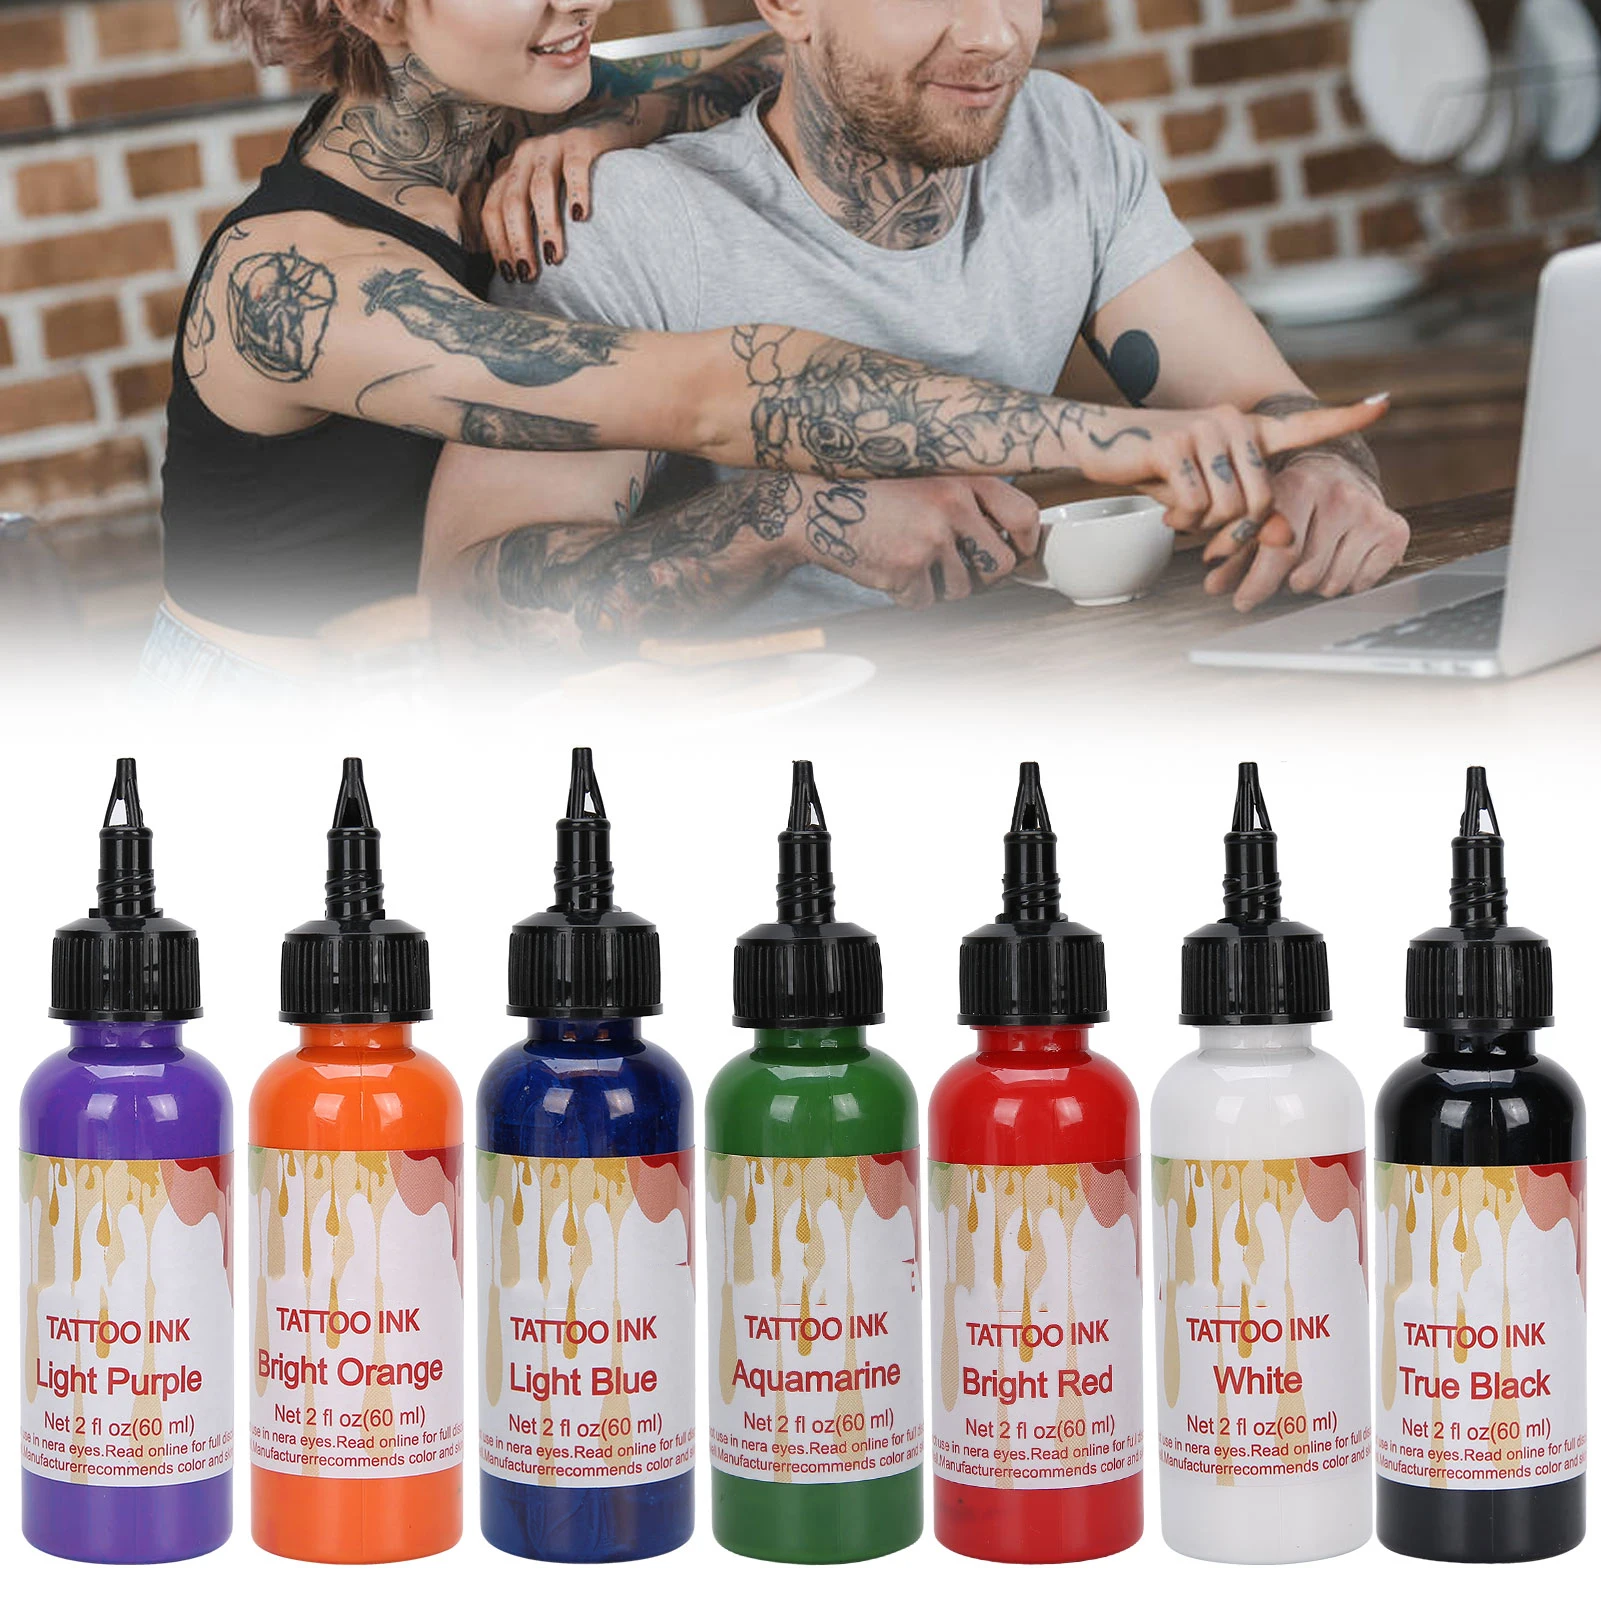 

New Tattoo Ink Microblading Pigment Safe Professional Semi-permanent Colorful Makeup Beauty Paints Accesories for Body Arts 60ml